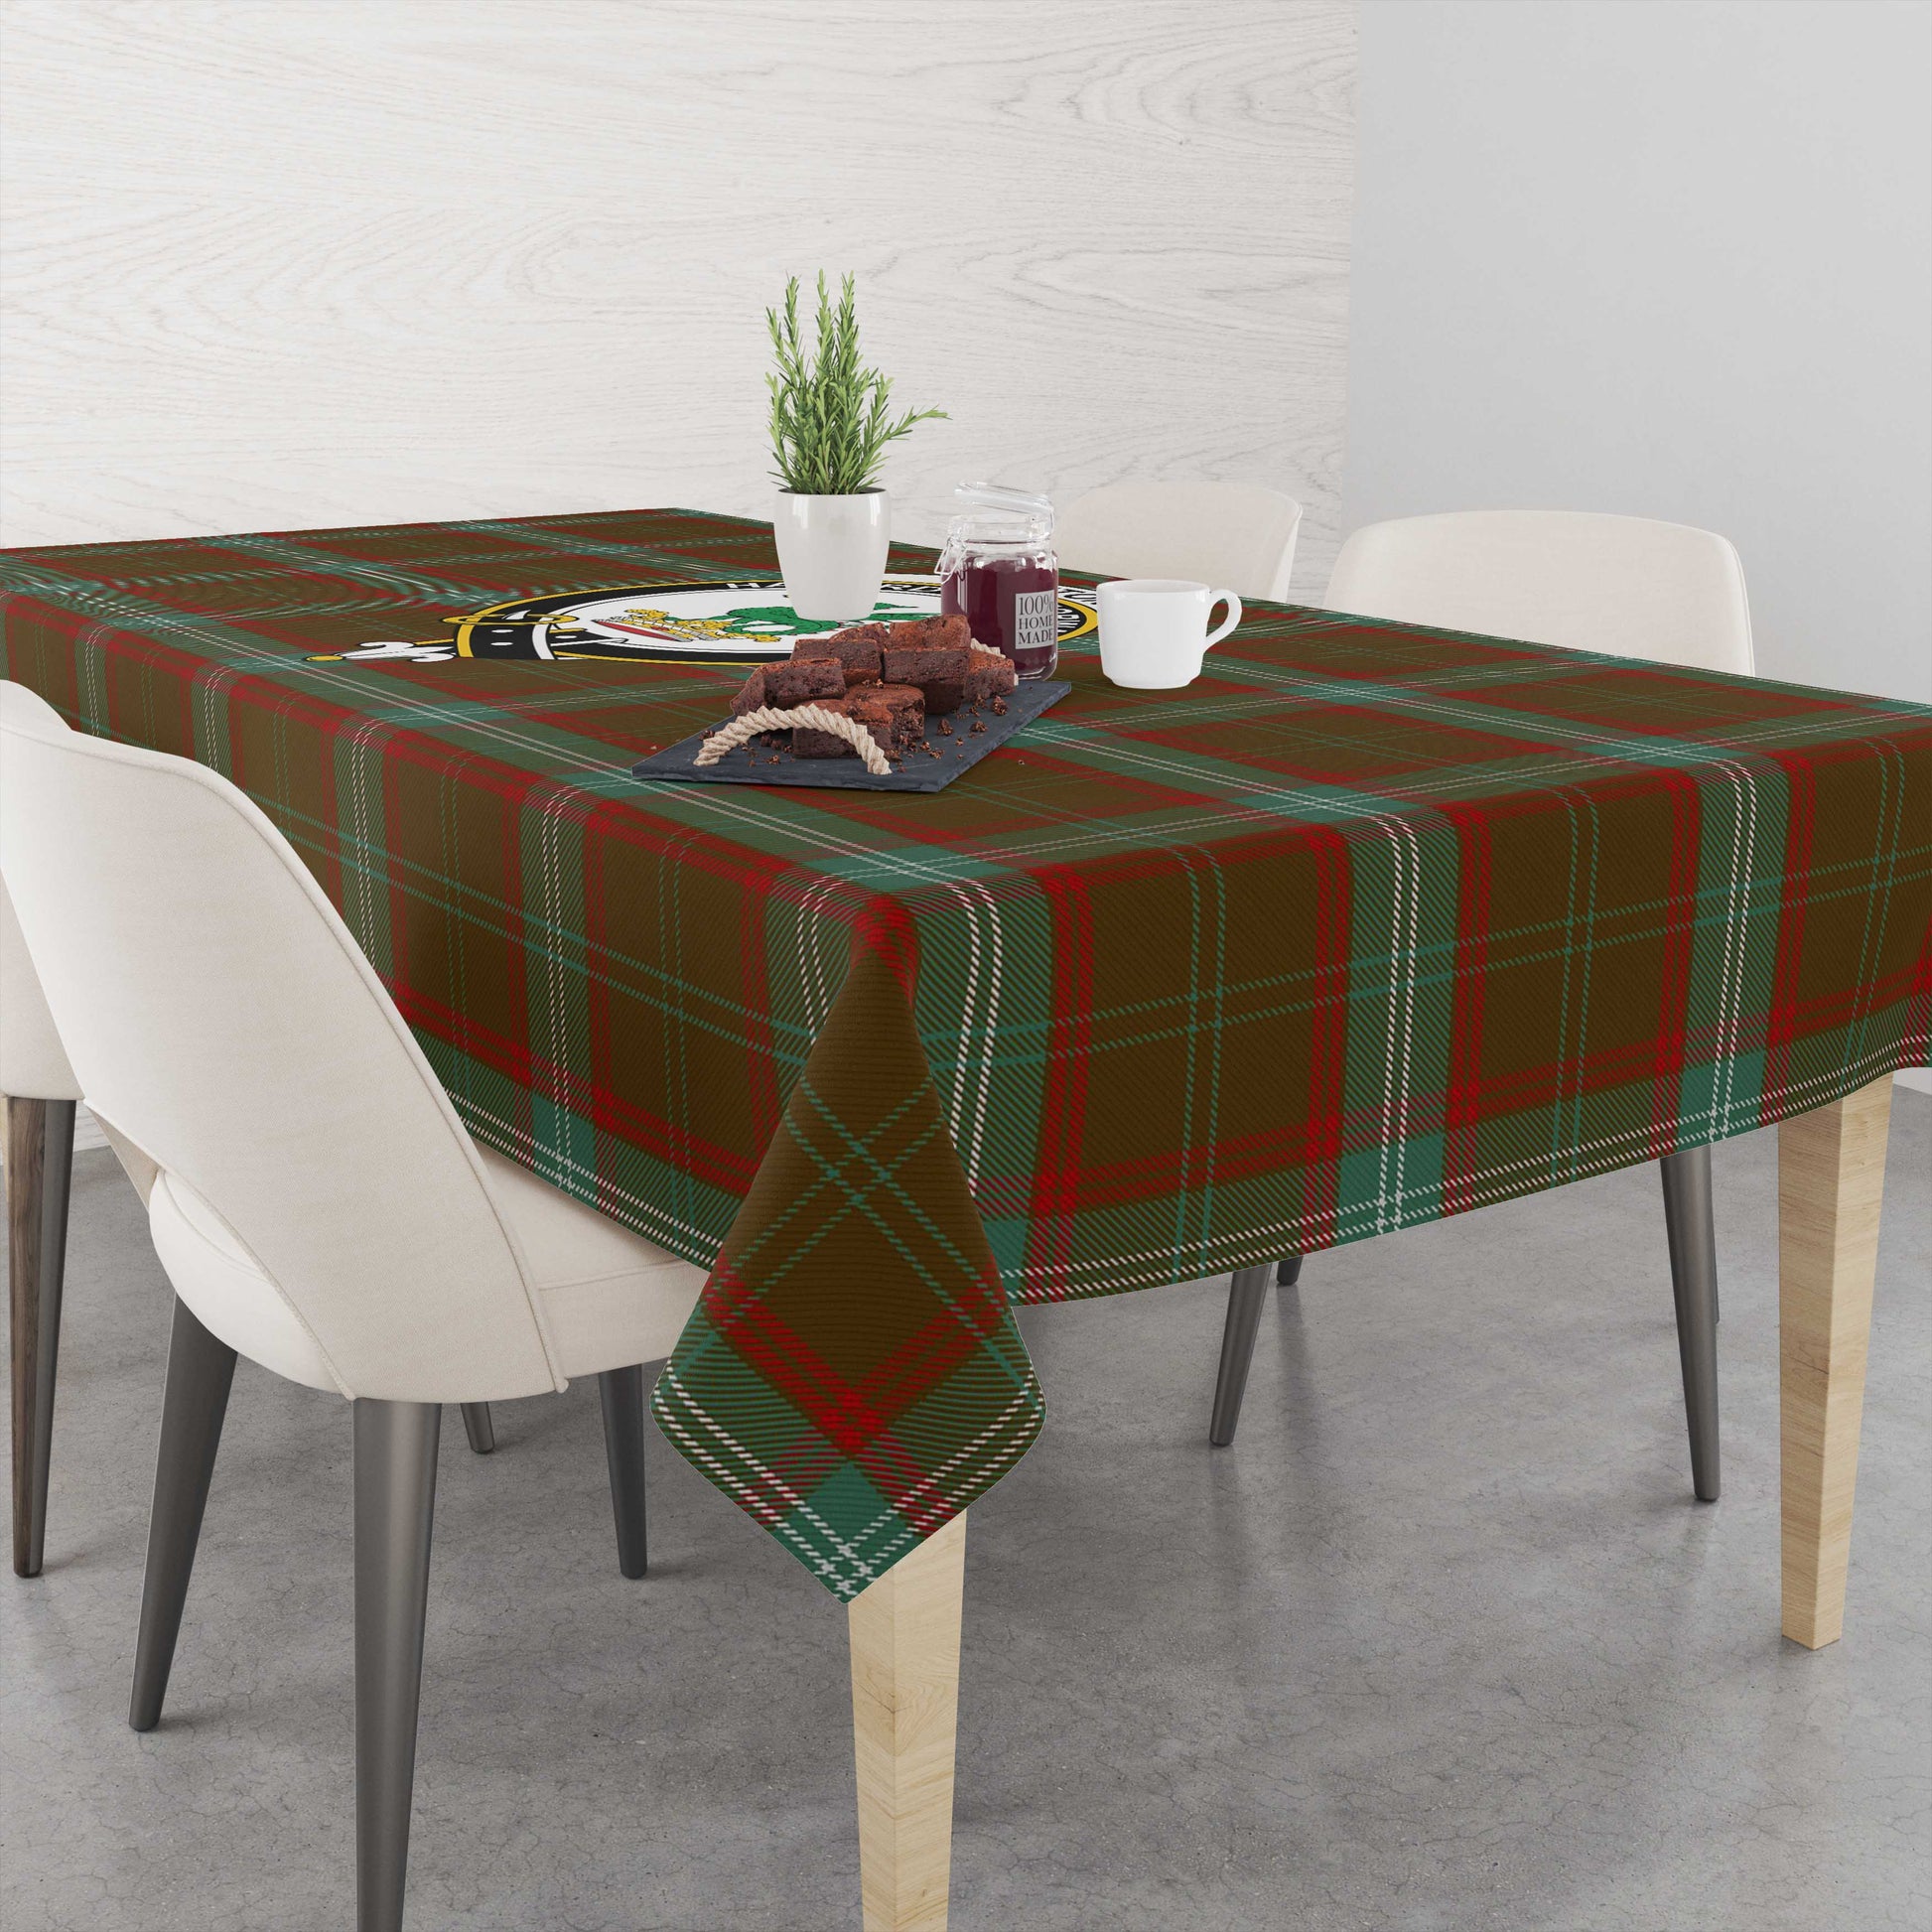 seton-hunting-tatan-tablecloth-with-family-crest